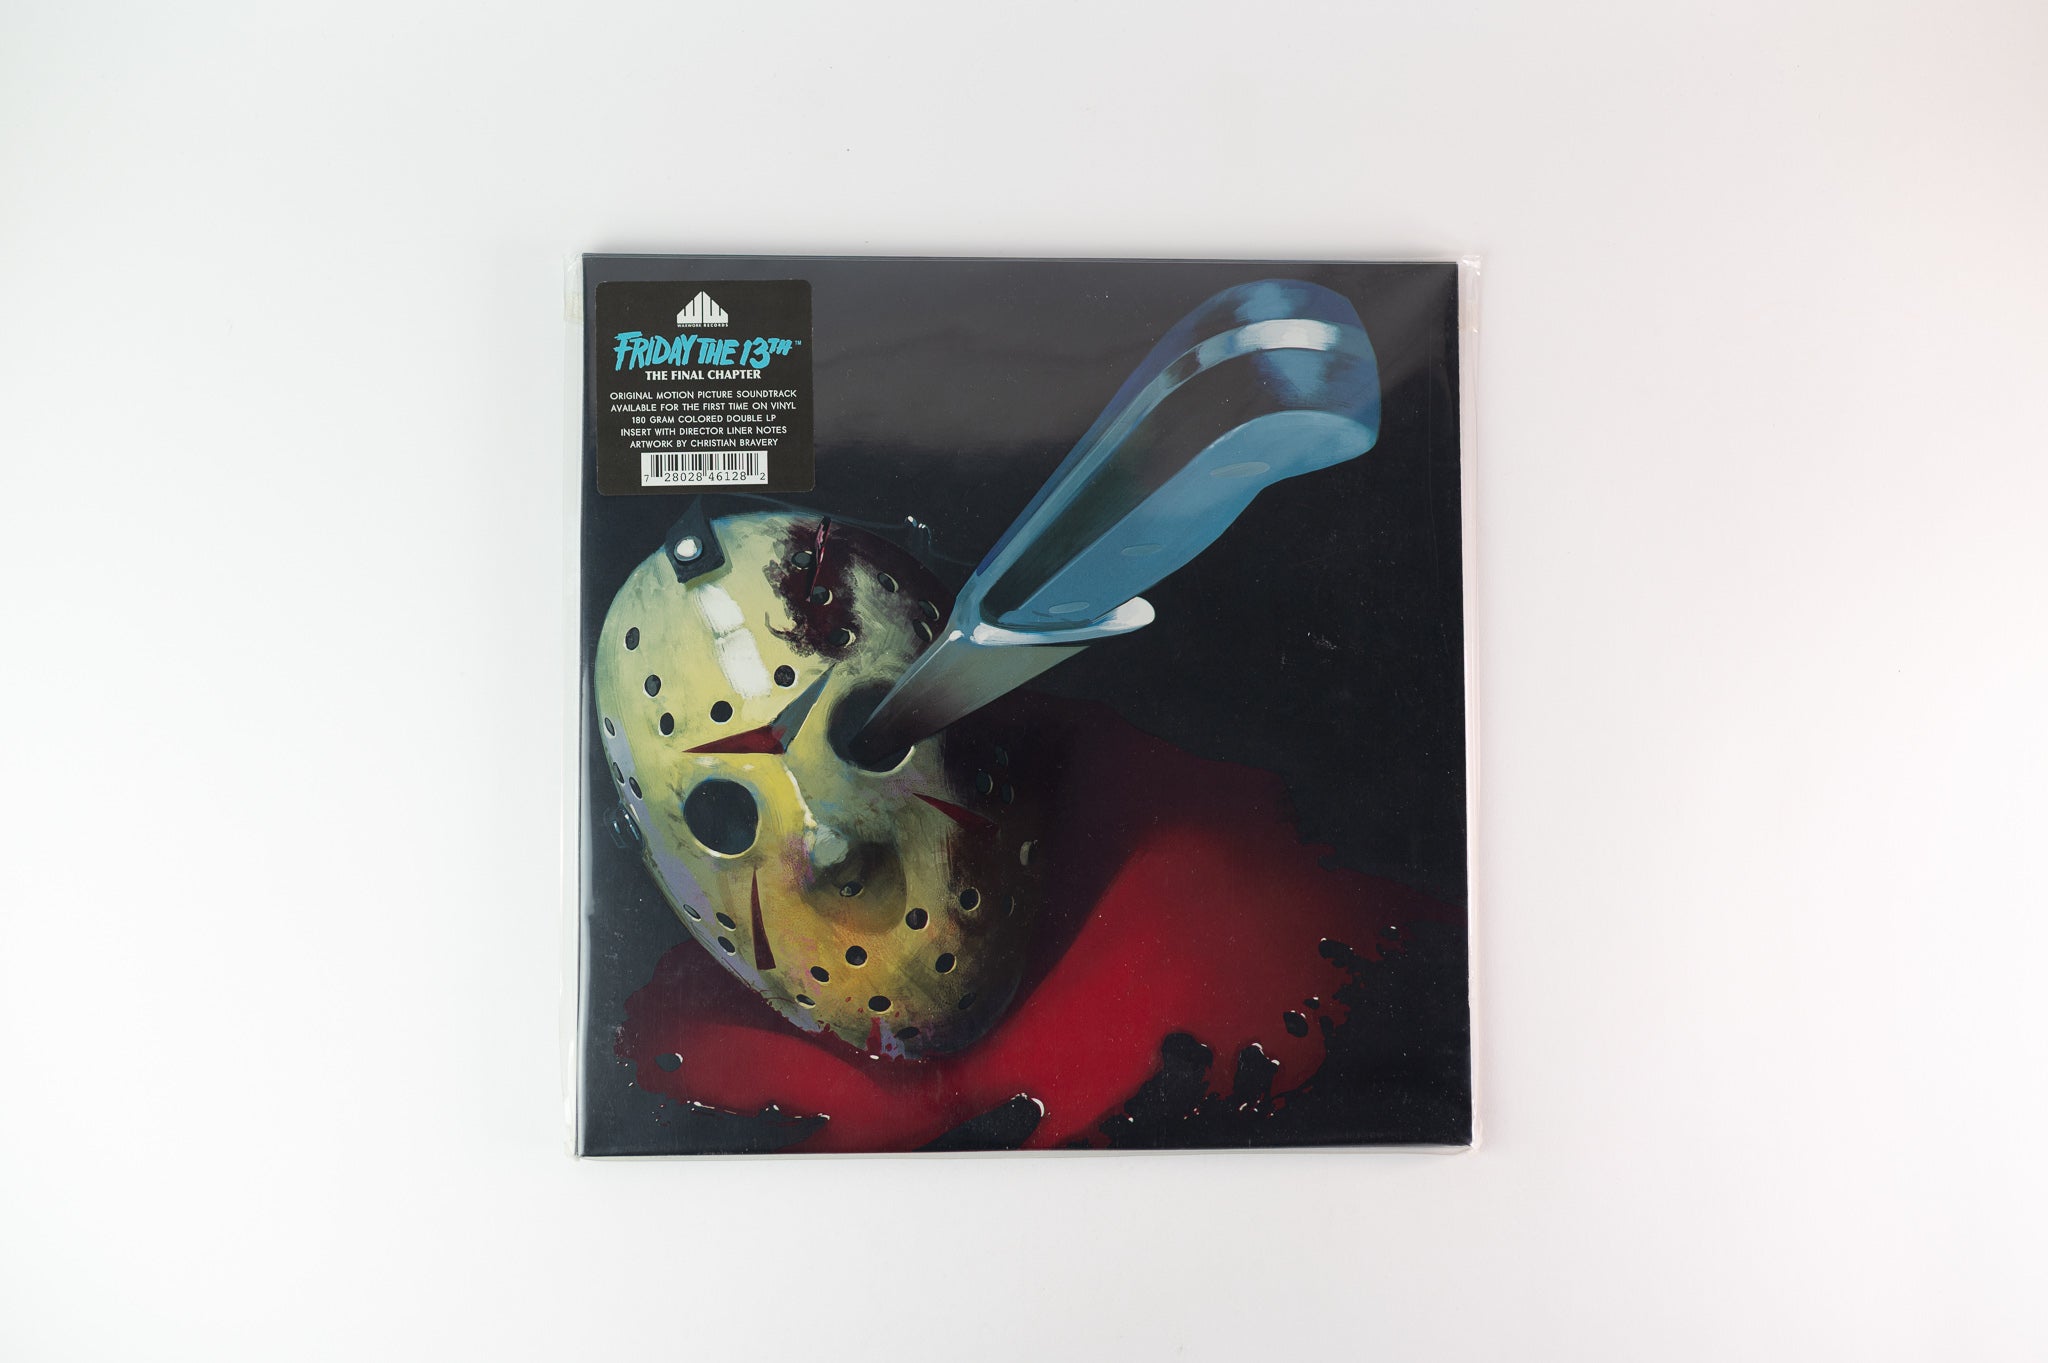 Harry Manfredini - Friday the 13th (The Final Chapter) on Waxwork Blue and White Swirl with Green Splatter